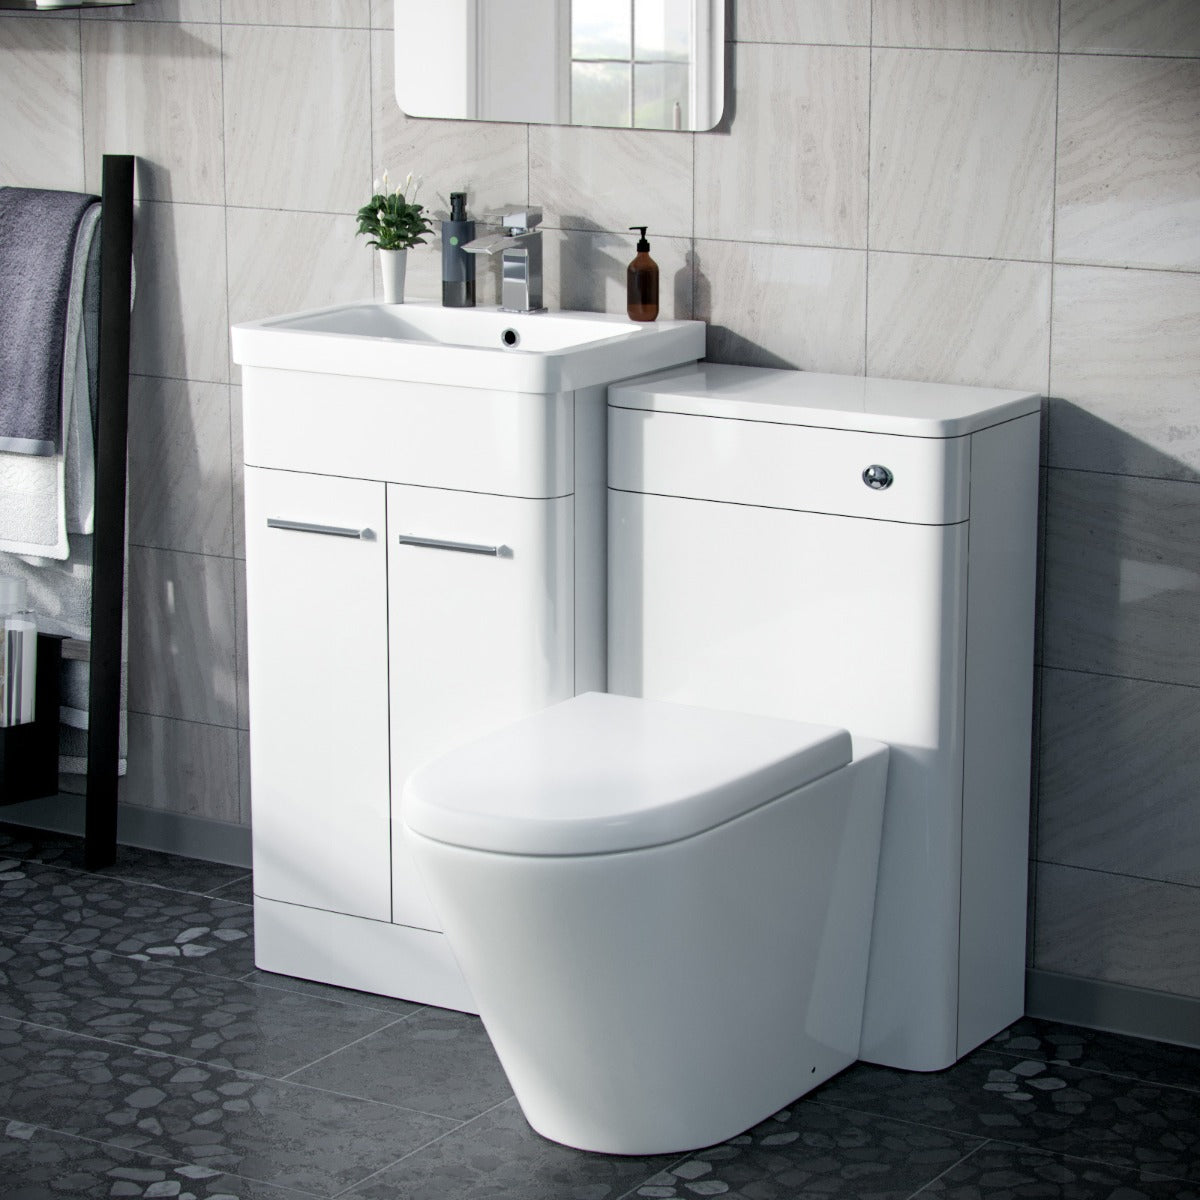 Afern 500mm Vanity Unit, WC Unit And Round BTW Toilet Gloss White